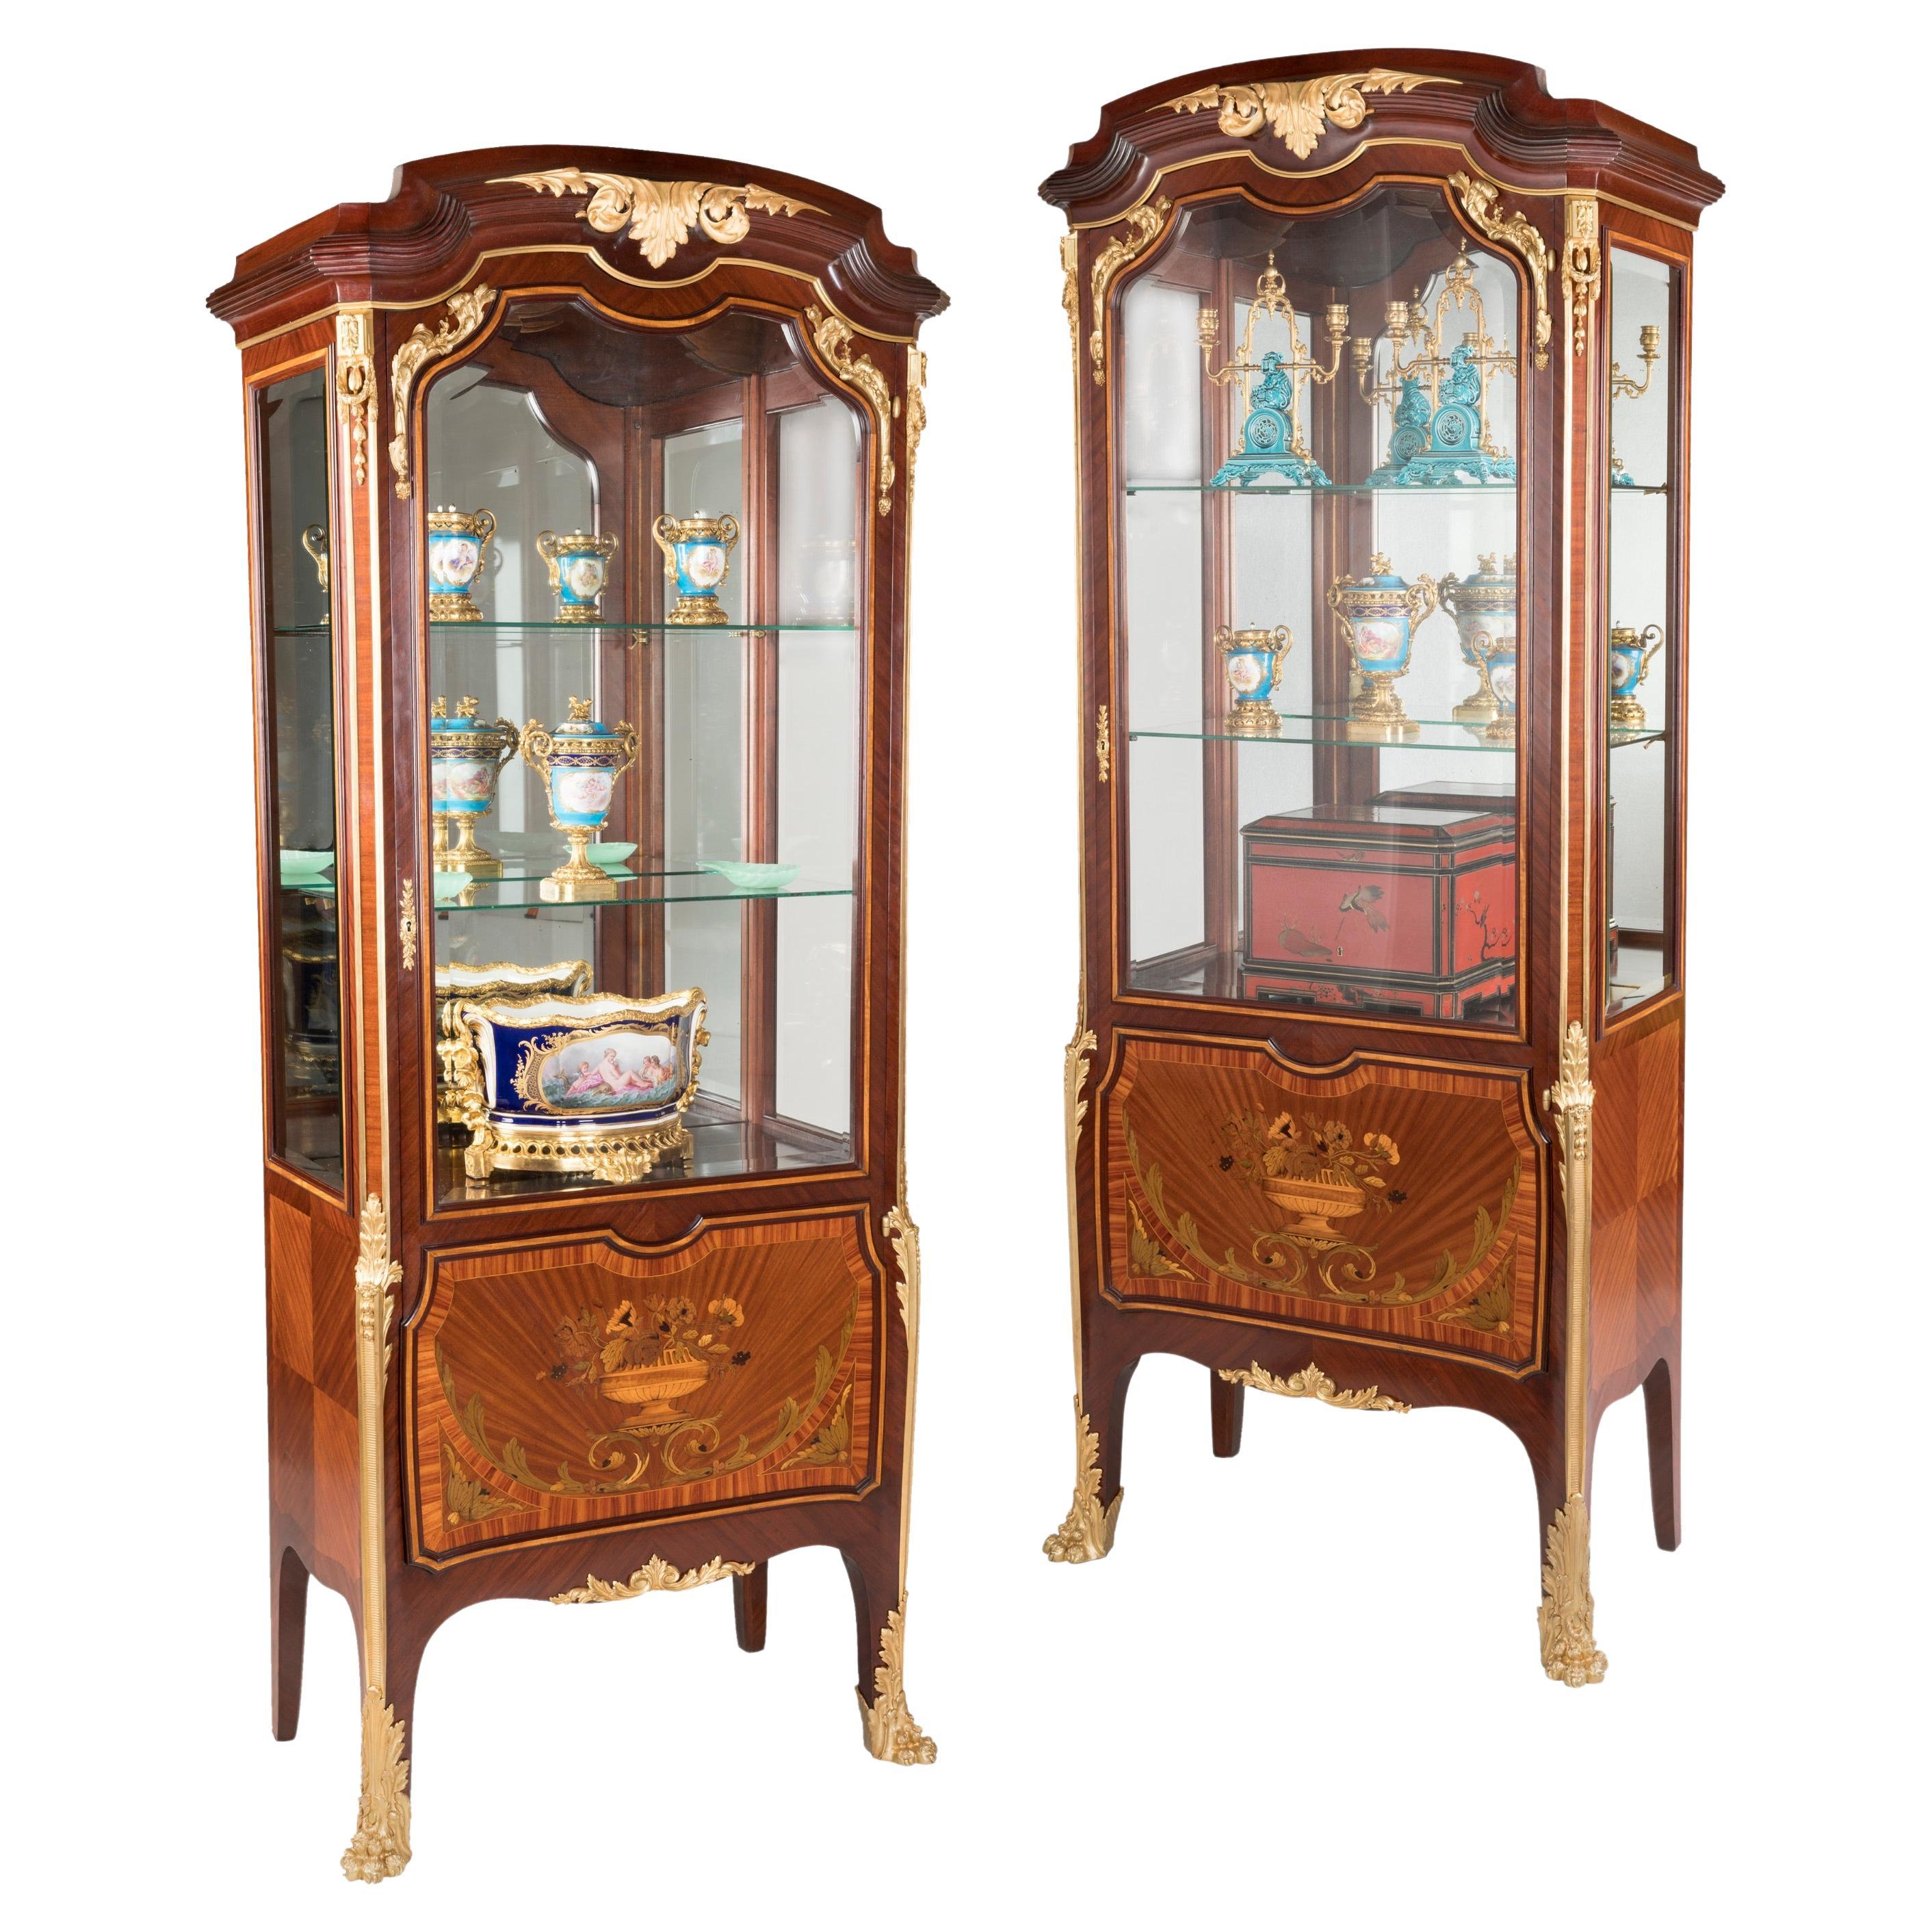 Rare Pair of 19th Century Marquetry Display Cabinets in the Louis XVI Style For Sale